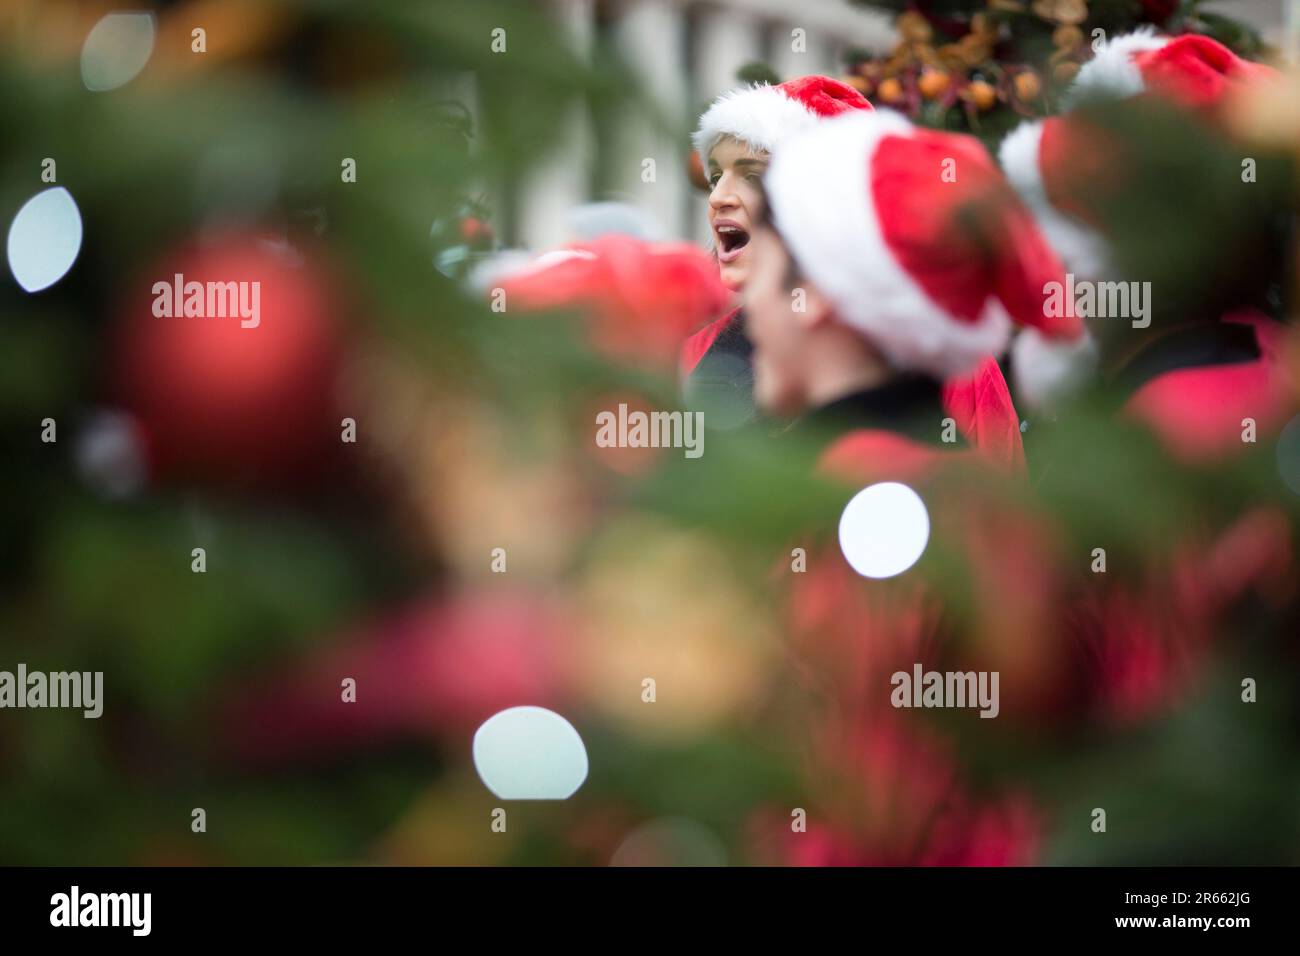 Christmassy decorations and outfits are seen in Covent Garden, central London. Stock Photo